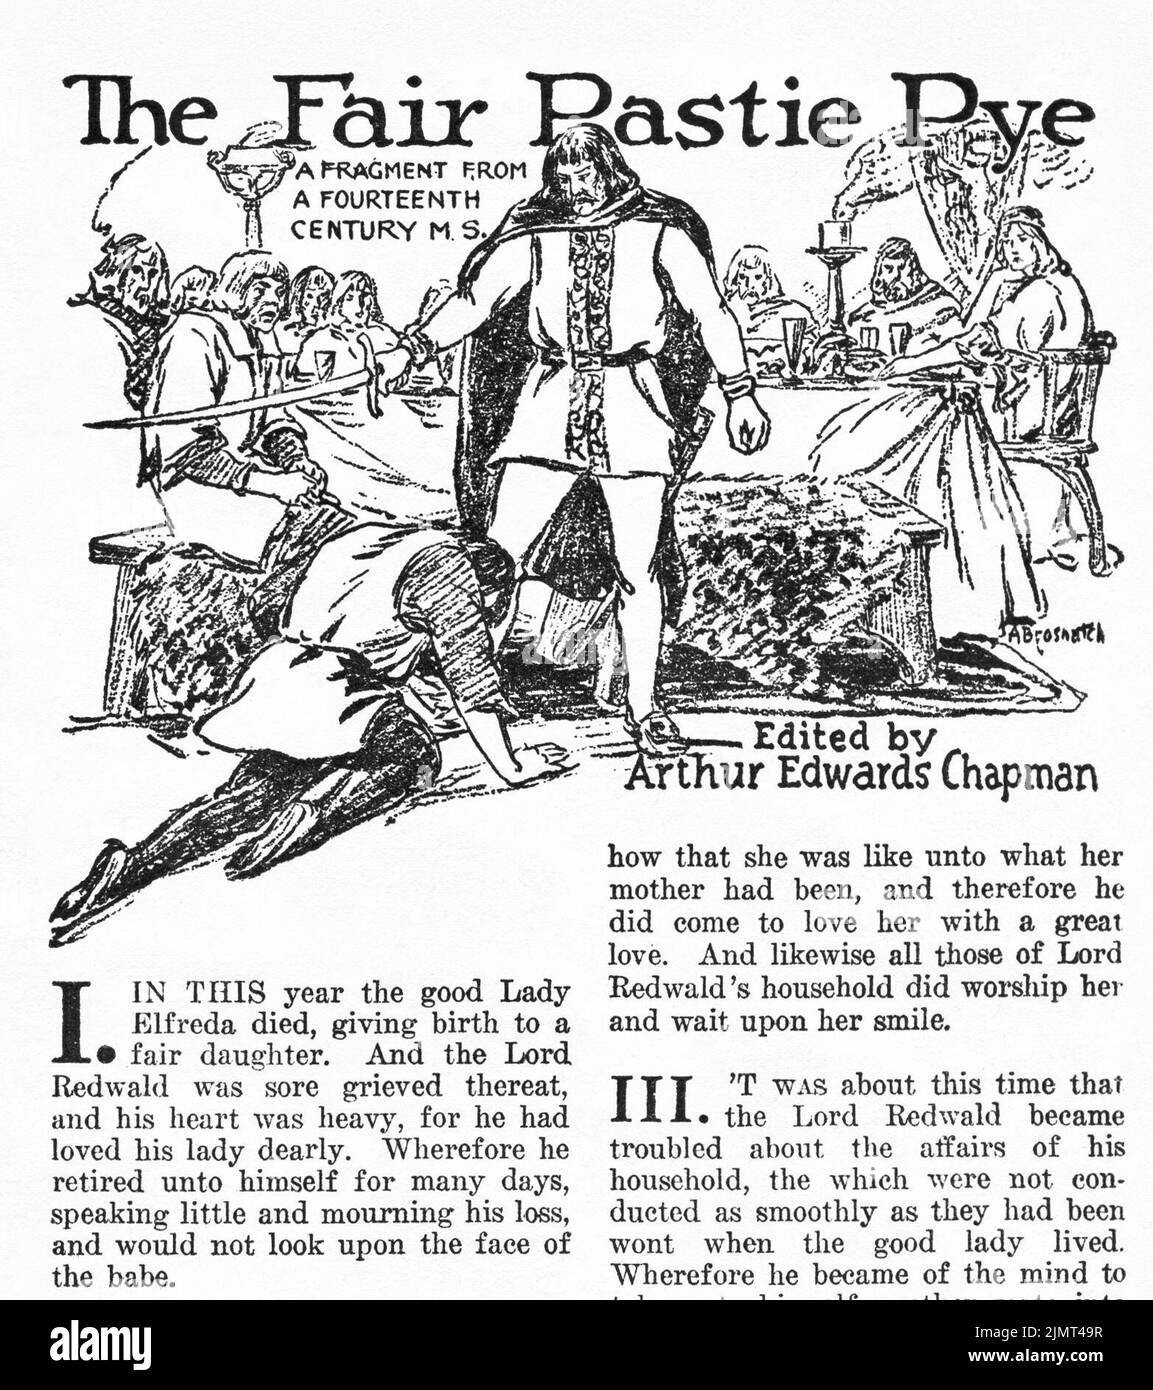 The Fair Pastie Pye, by Arthur Edwards Chapman. Illustration by Andrew Brosnatch from Weird Tales, January 1926 Stock Photo